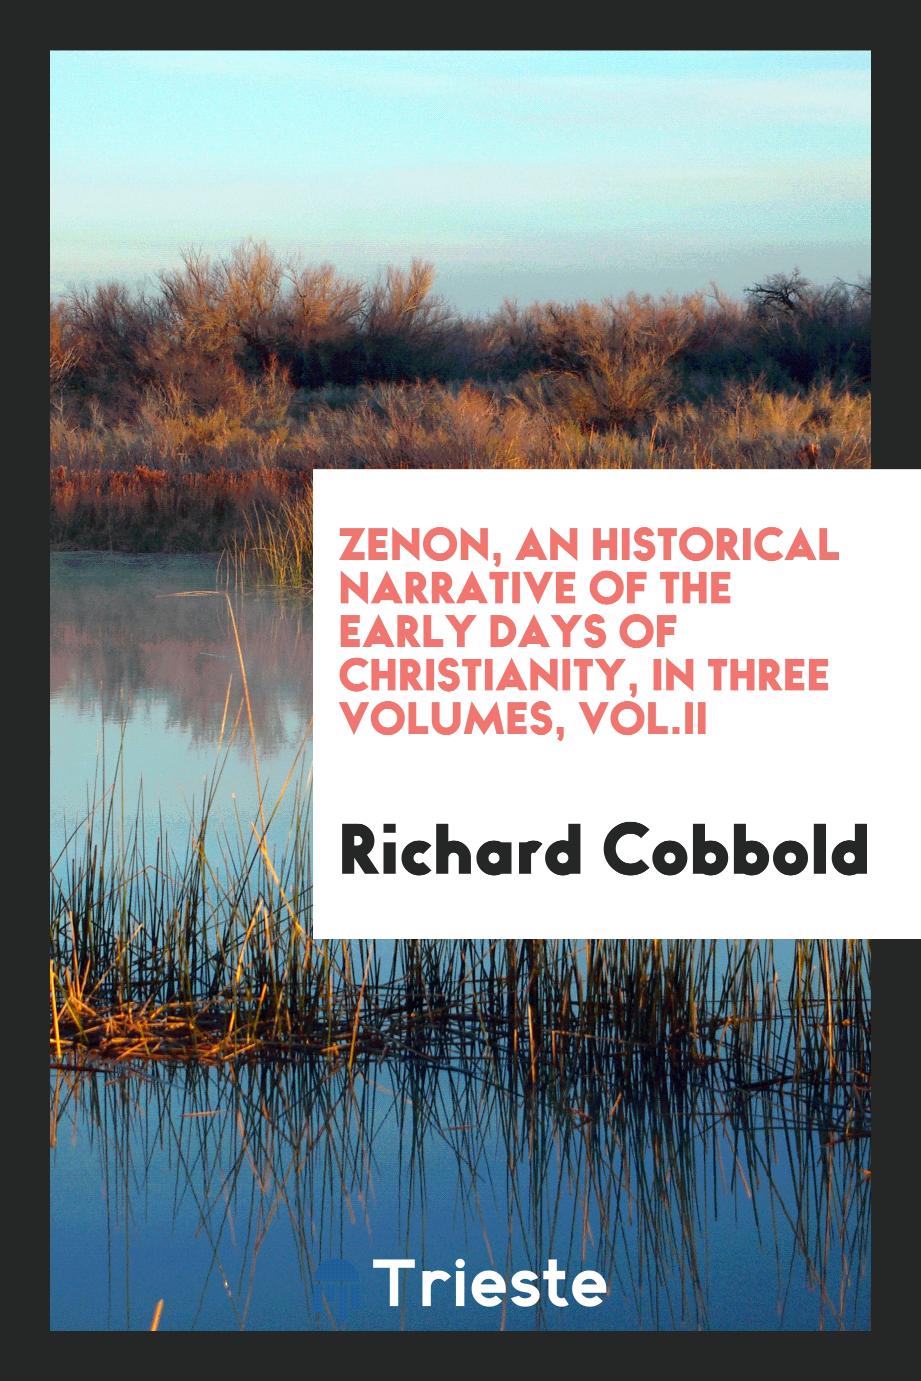 Zenon, an historical narrative of the early days of Christianity, in three volumes, Vol.II